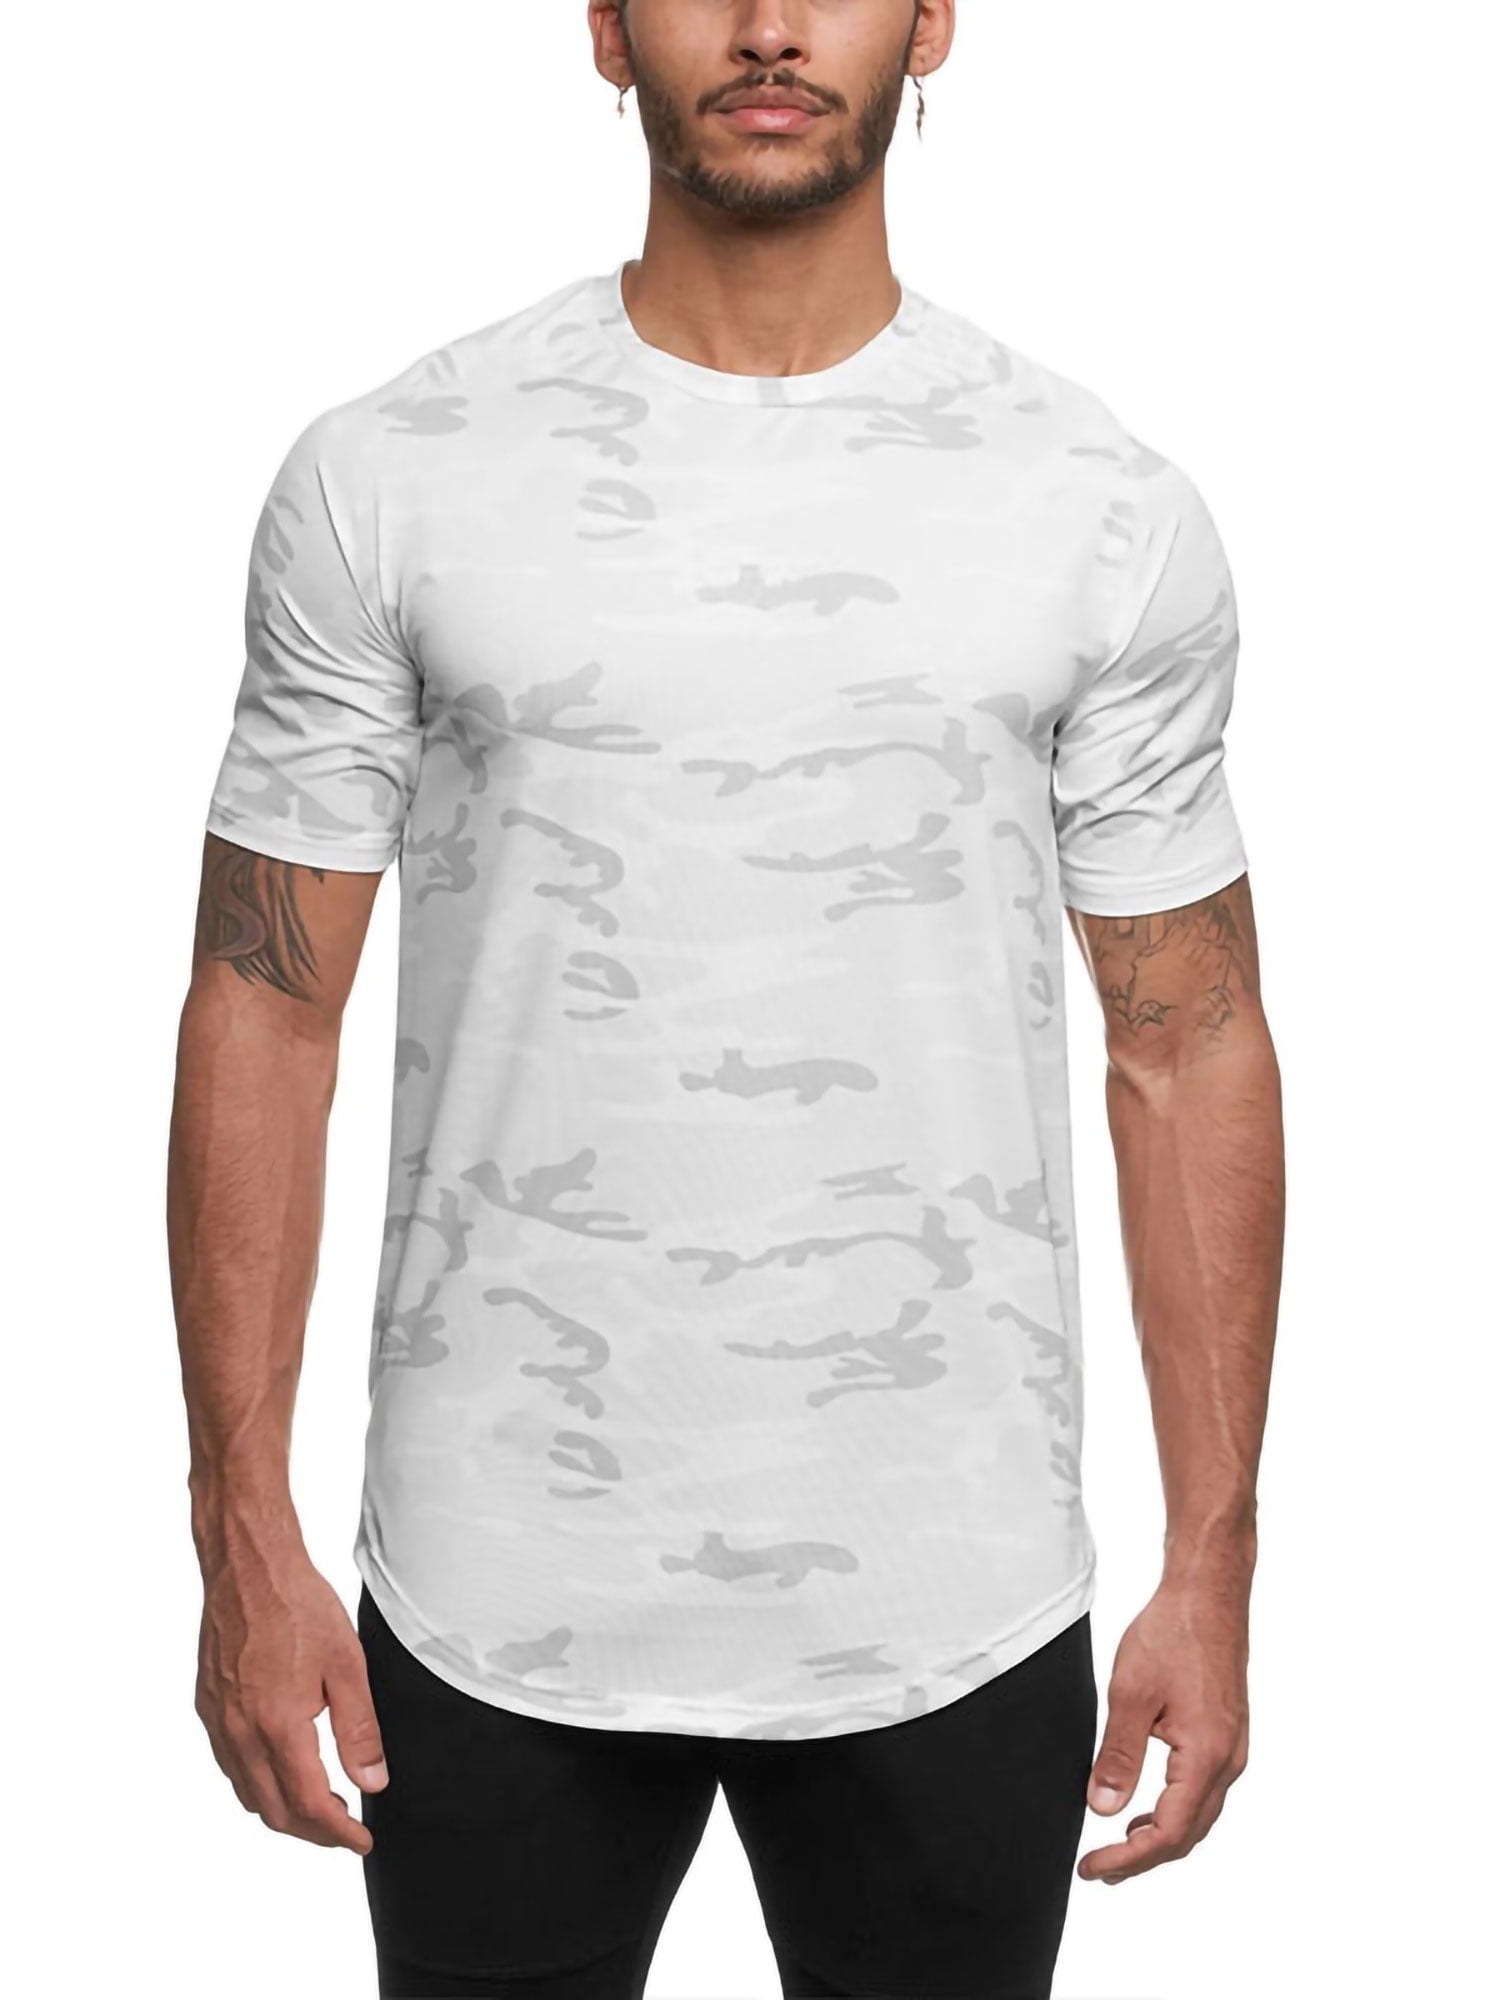 Men Summer Short Sleeve Tee T-Shirts Camo Casual Muscle Gym Sports Tops Blouse 